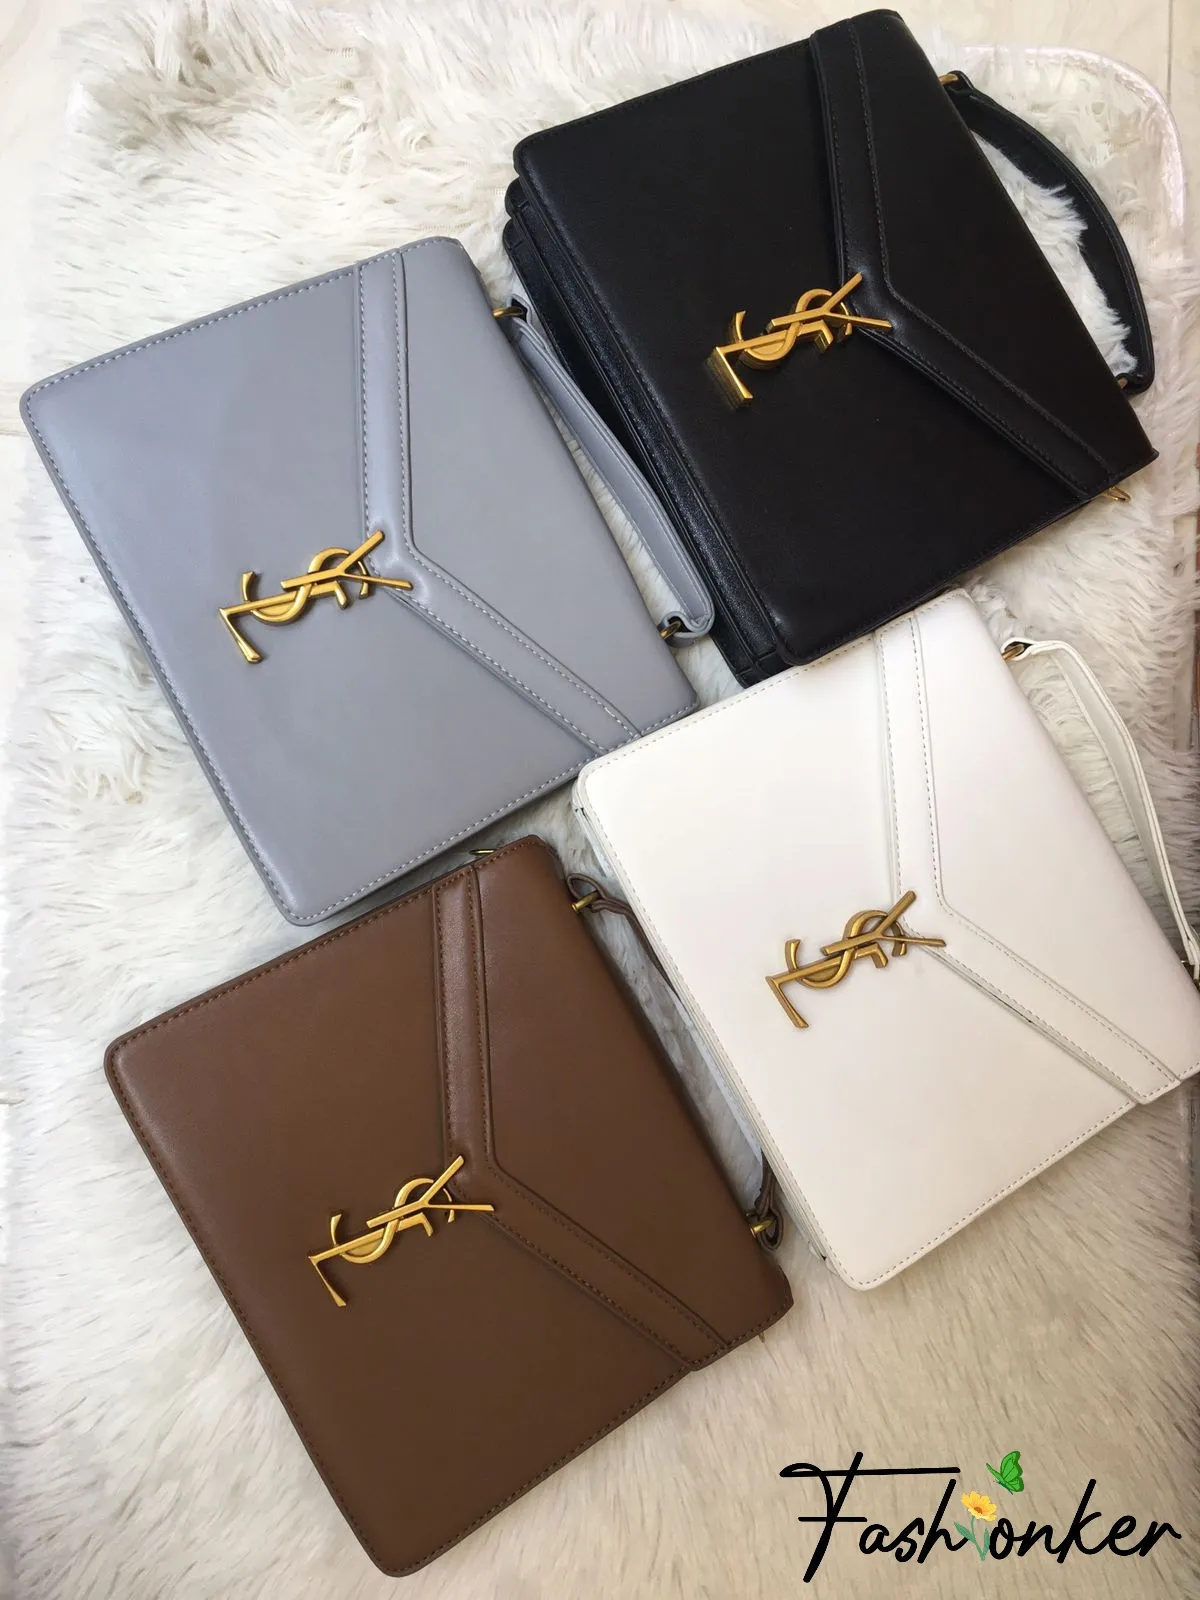 Ysl Cassandra Bag With Top Handle 